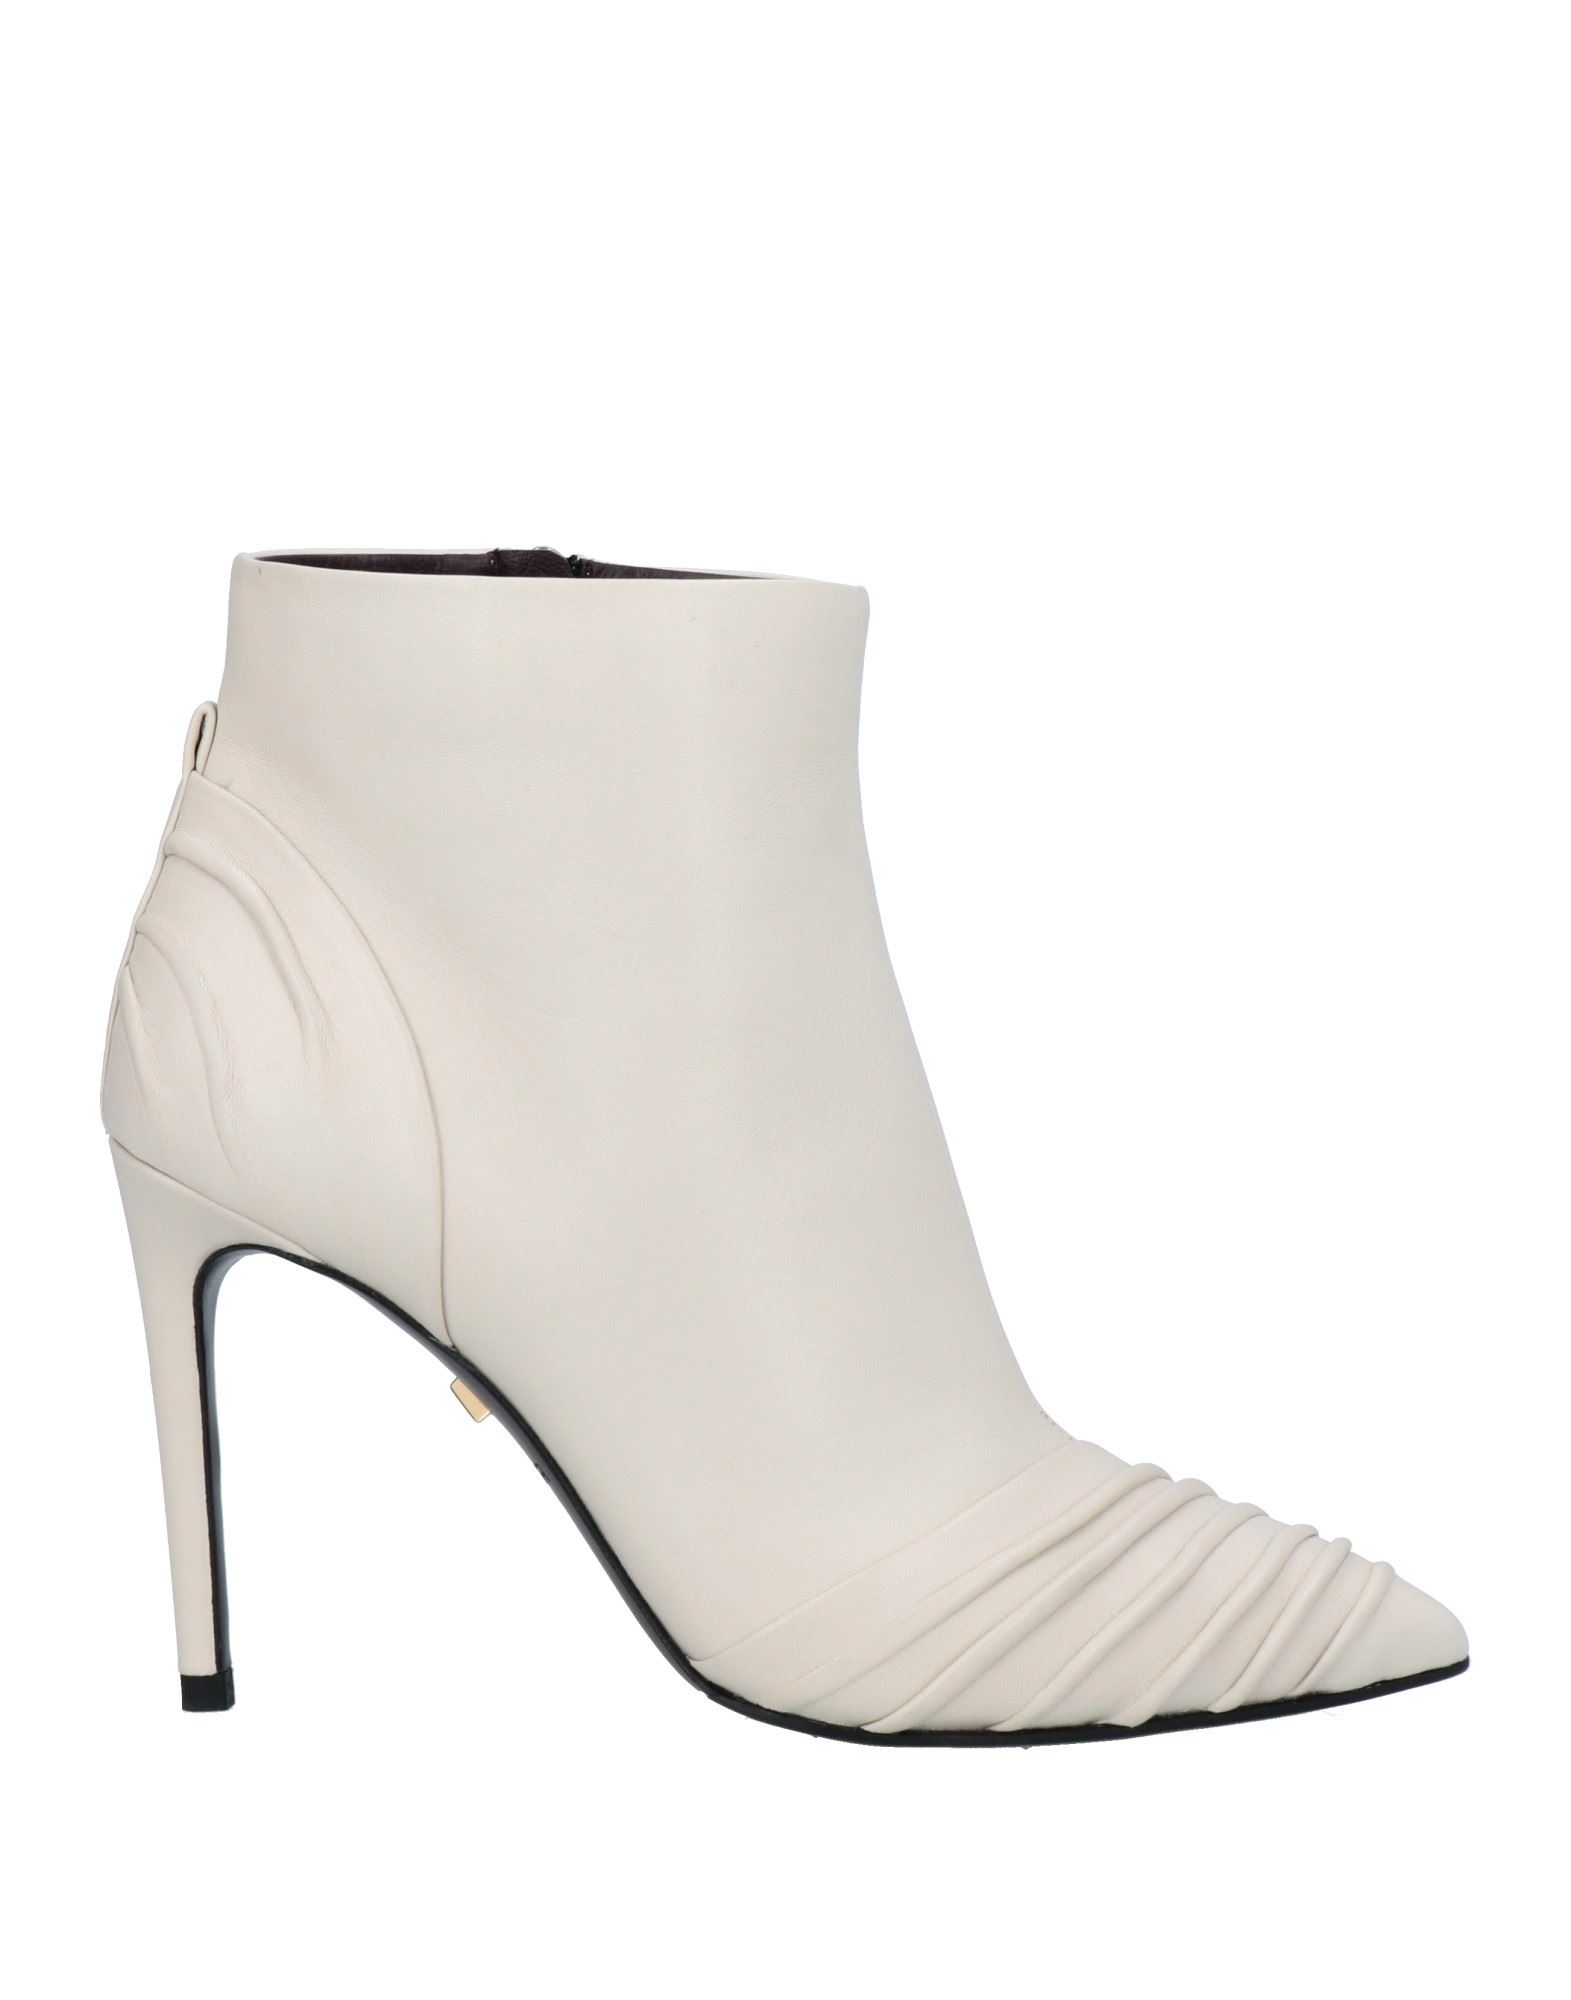 Greymer Ankle Boots In White